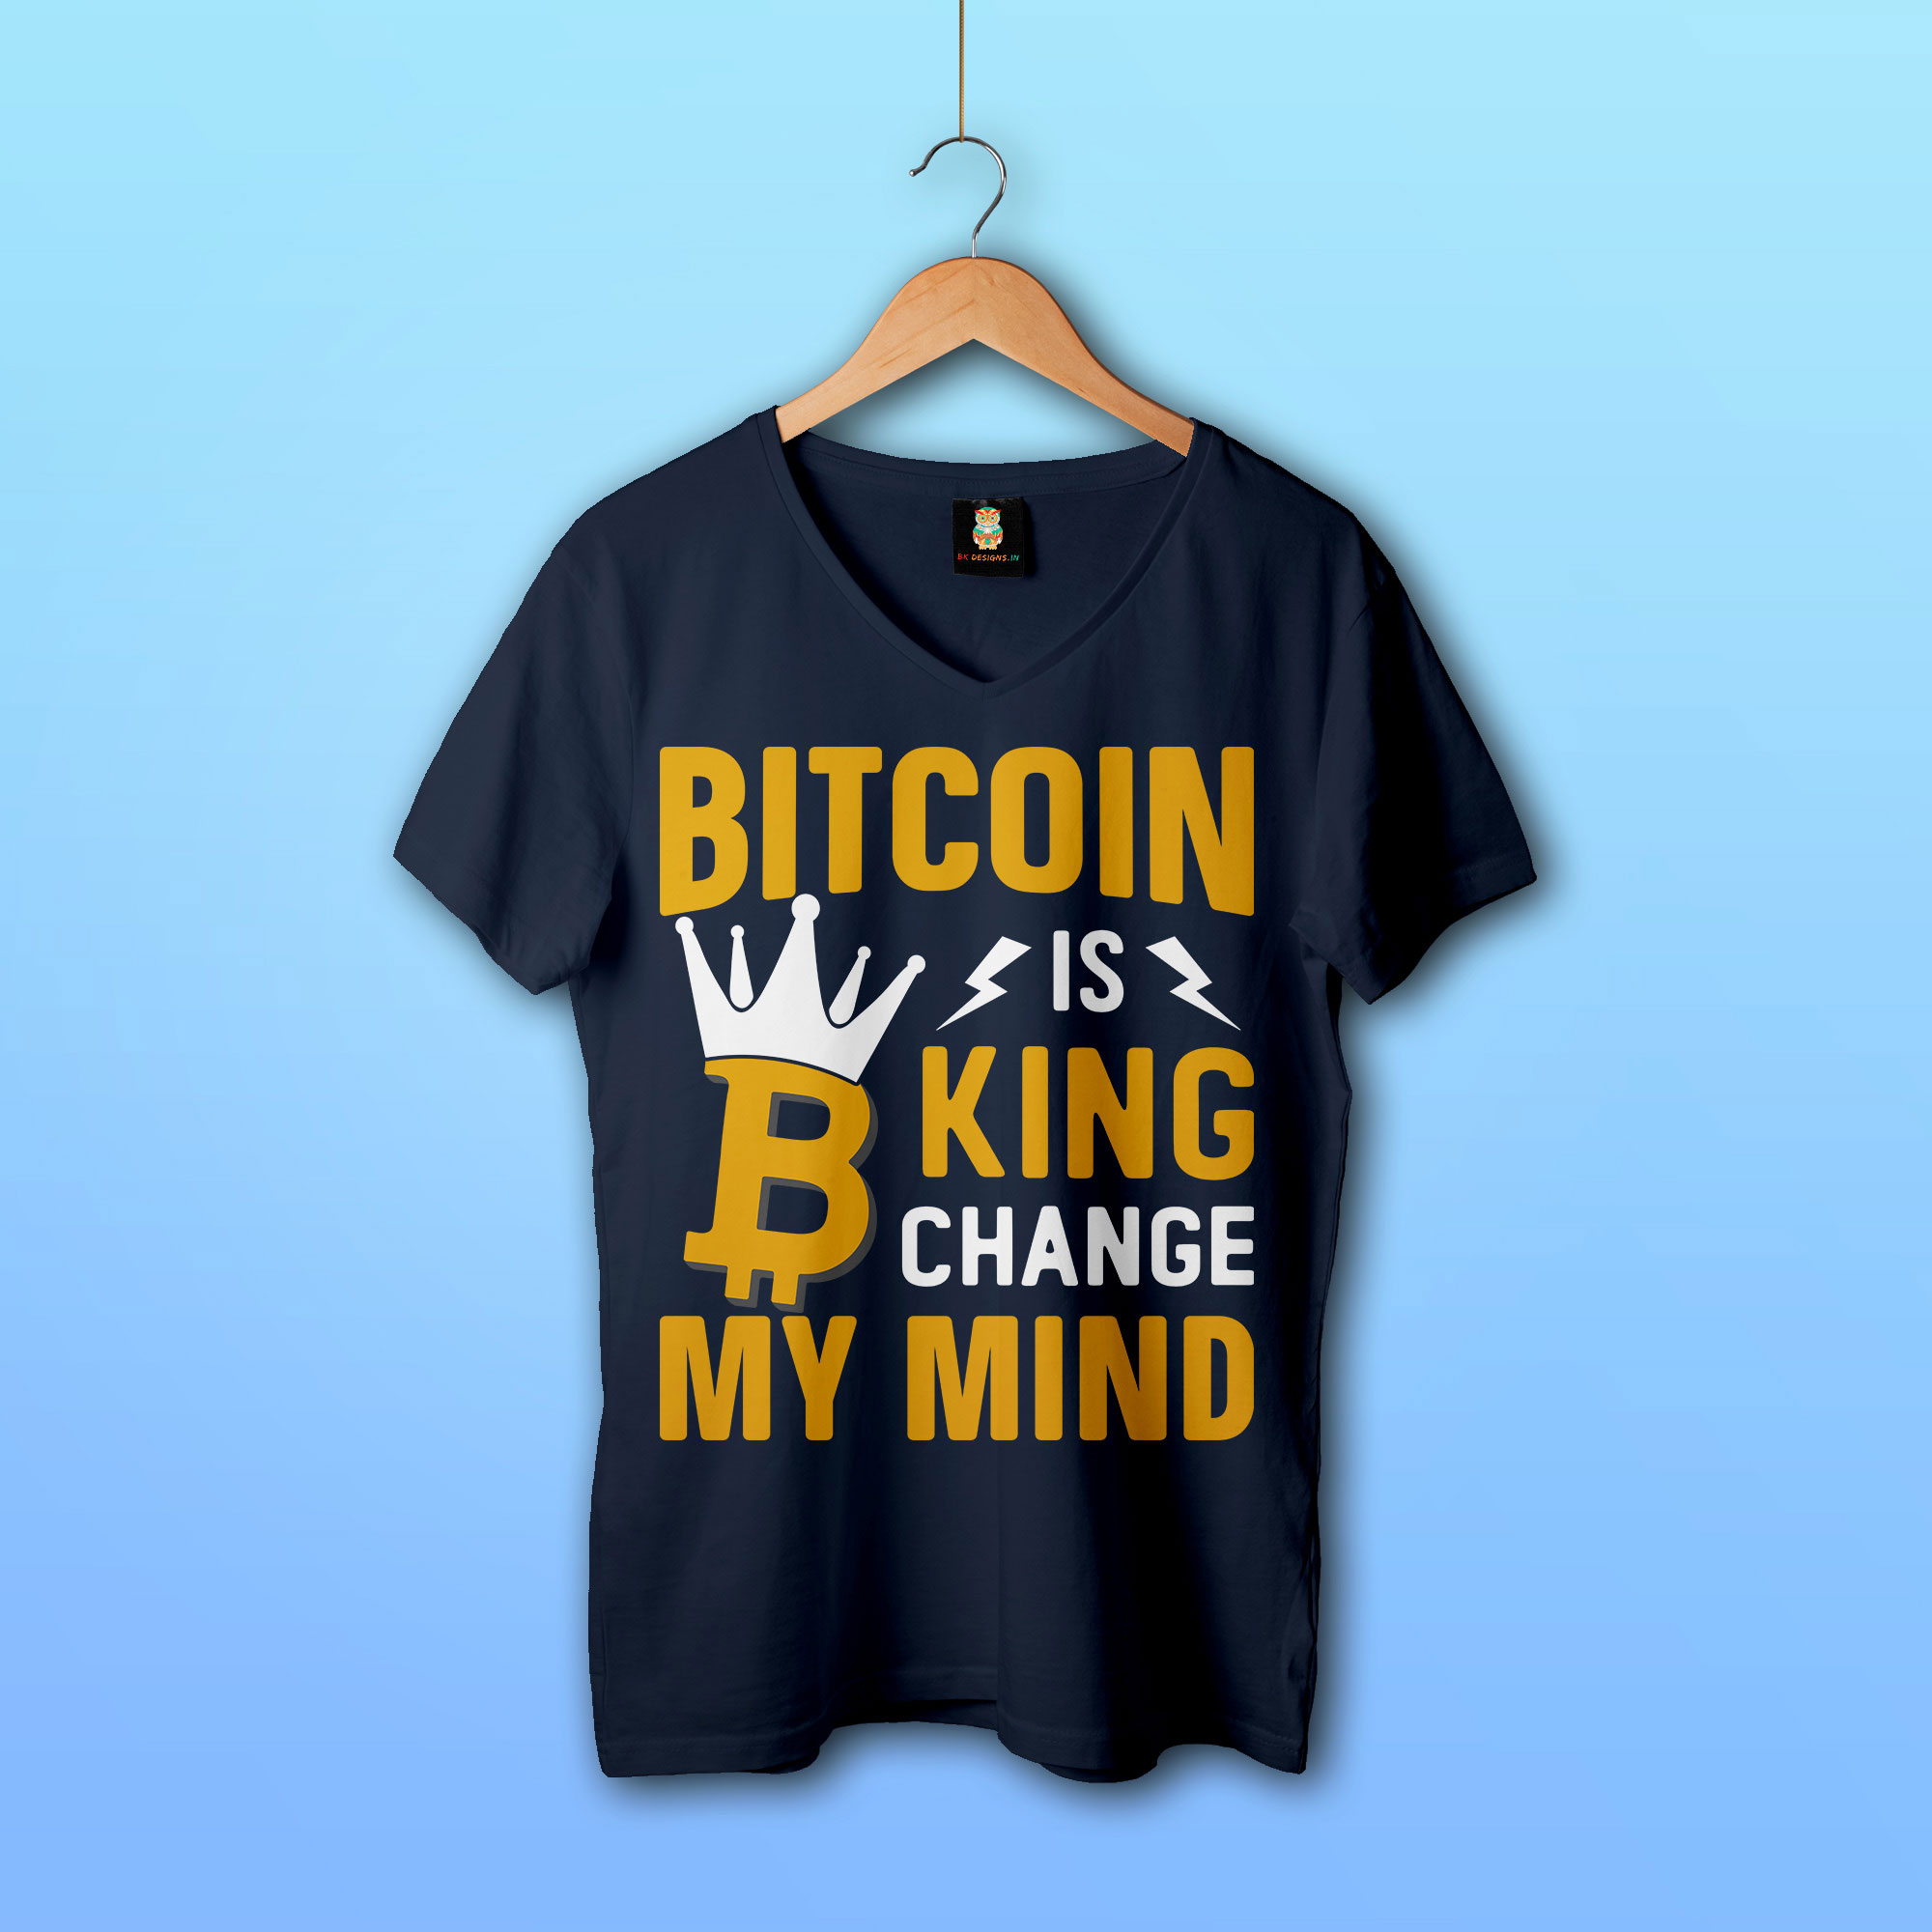 Bitcoin is king change my mind – Printed V Neck T-Shirt - Crypto - Bk  Designs